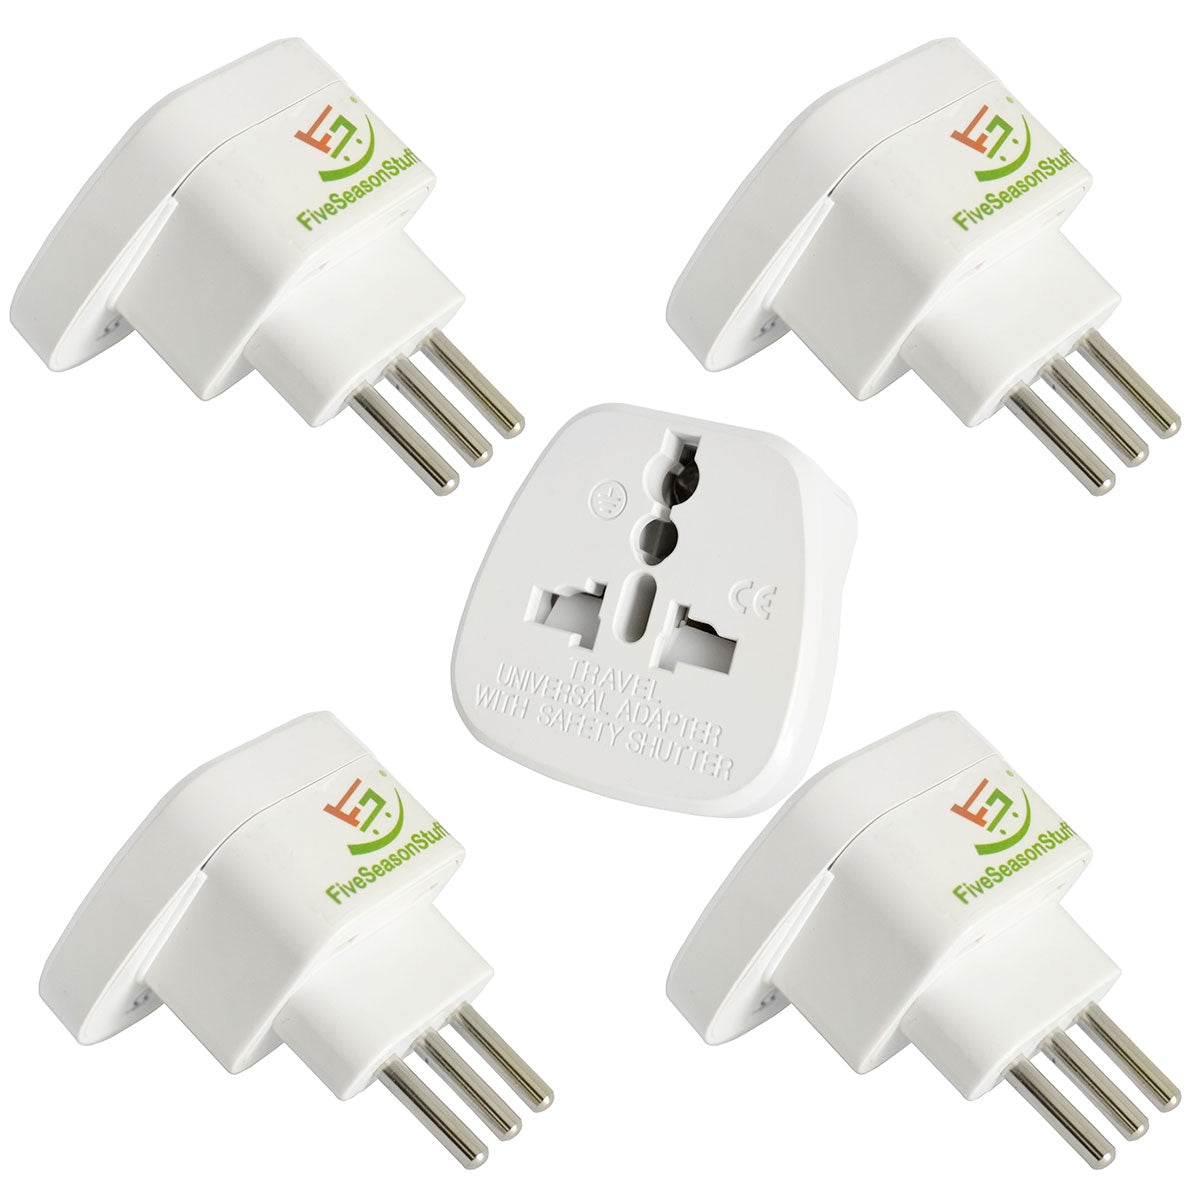 5 Travel Adapters for Traveling to Italy (White) Type L